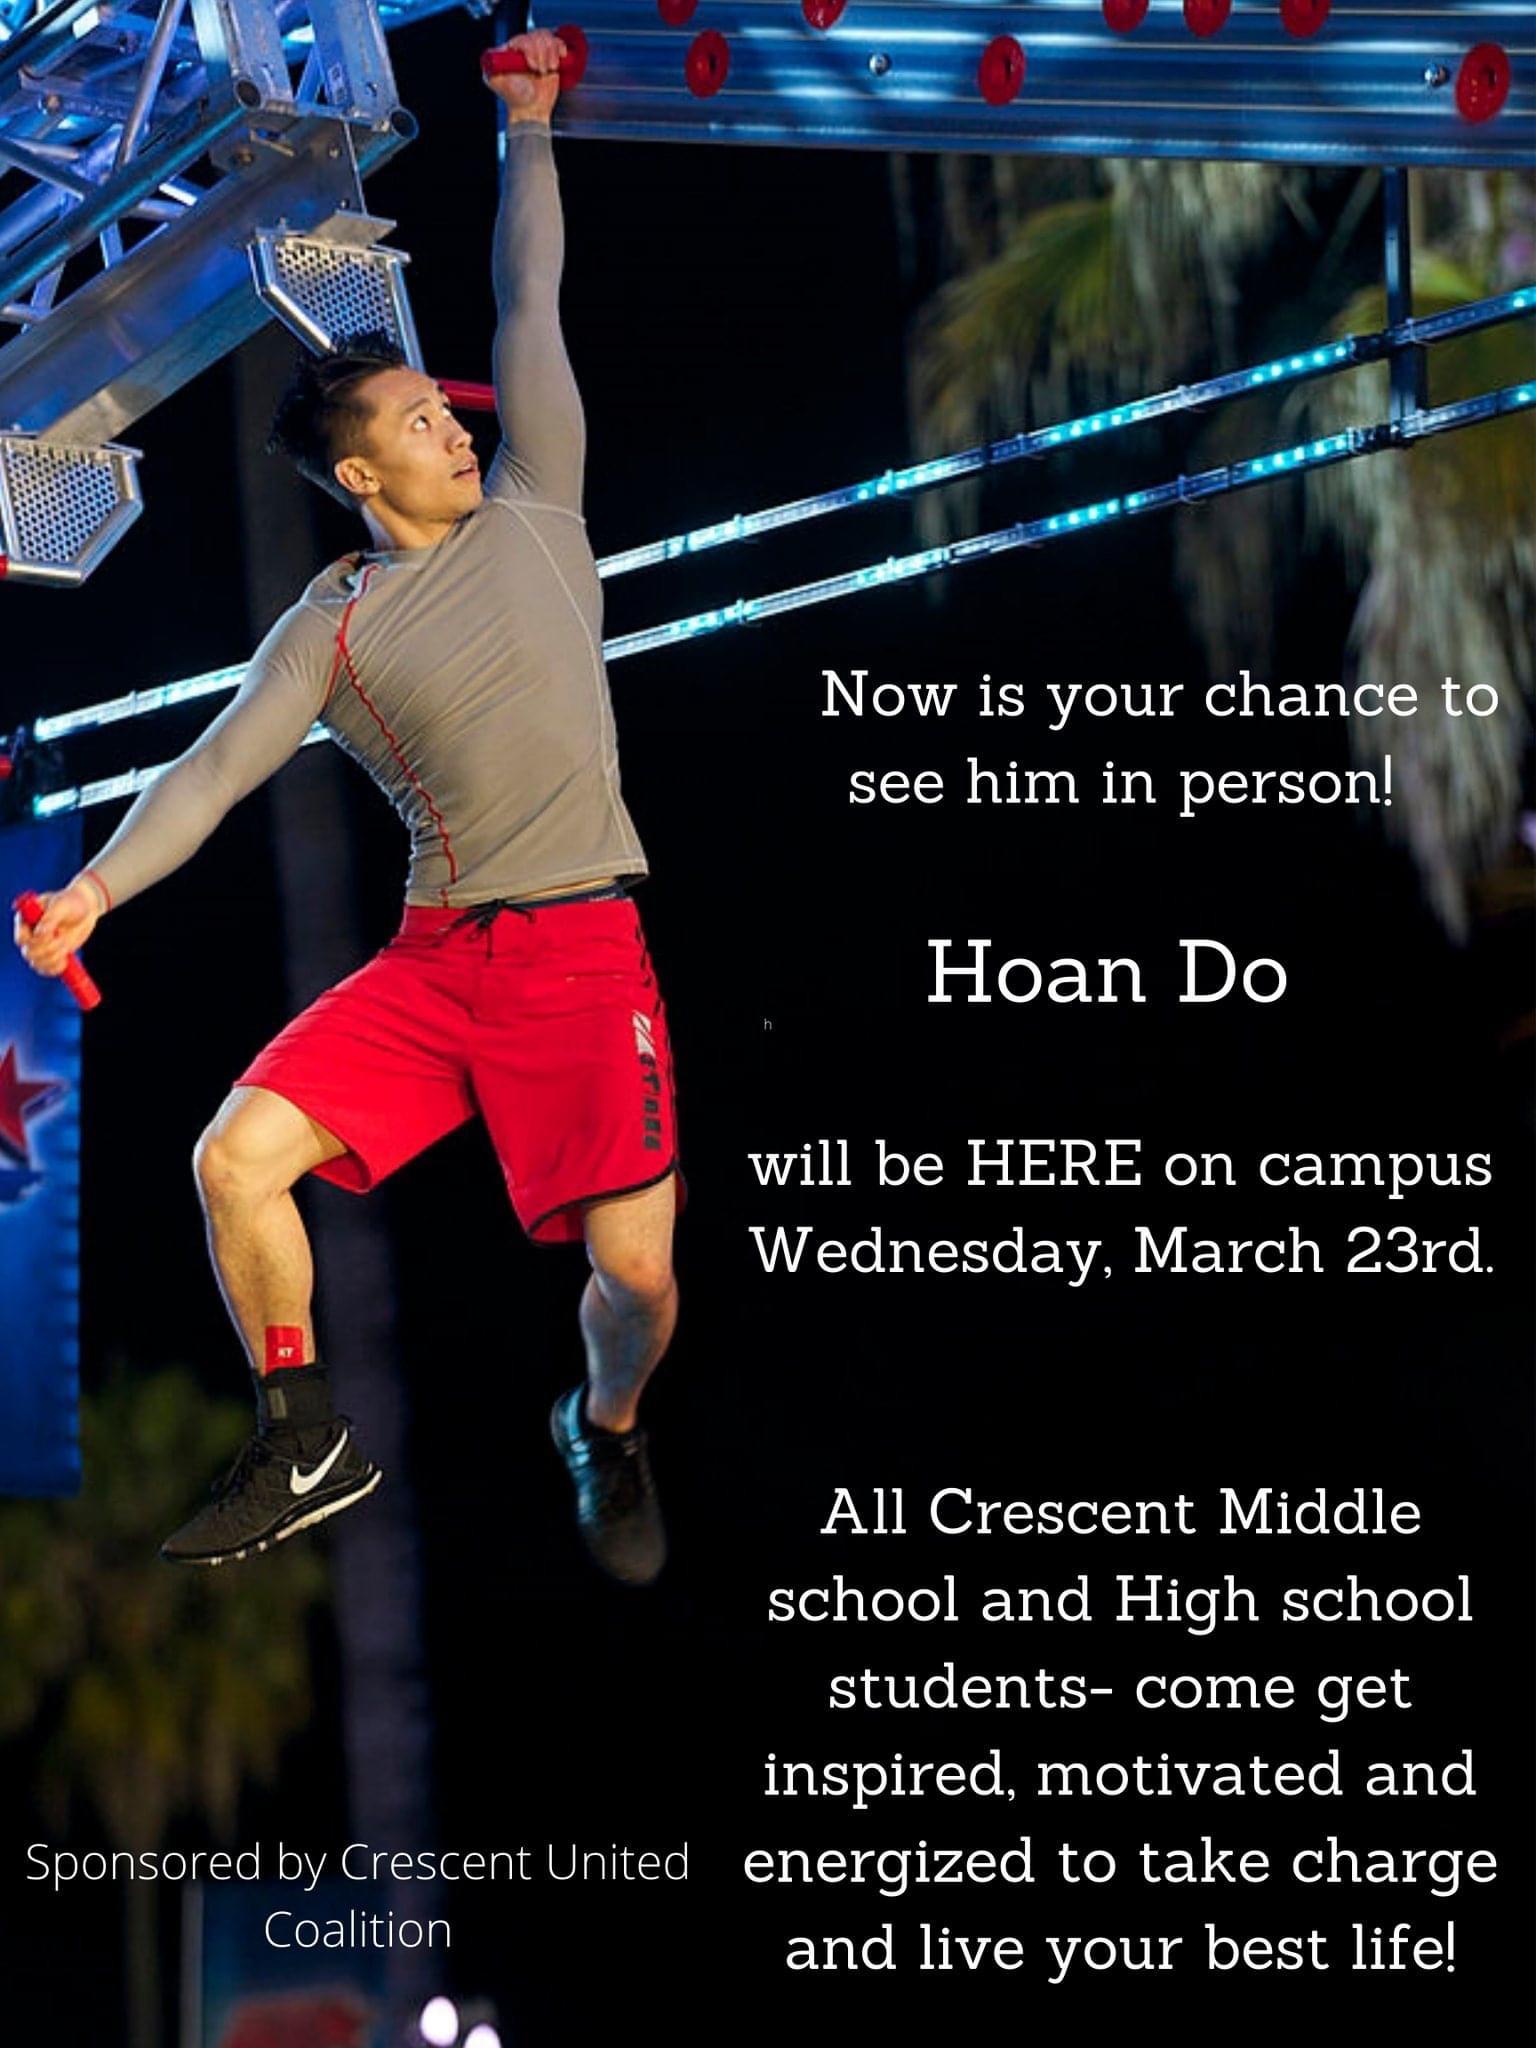 Now is your chance to see him in person!  Hoan Do will be here on campus, Wednesday March 23rd.  All Crescent Middle school and High school students -- come get inspired, motivated, and energized to take charge and live your best life!  Sponsored by Crescent United Coalition